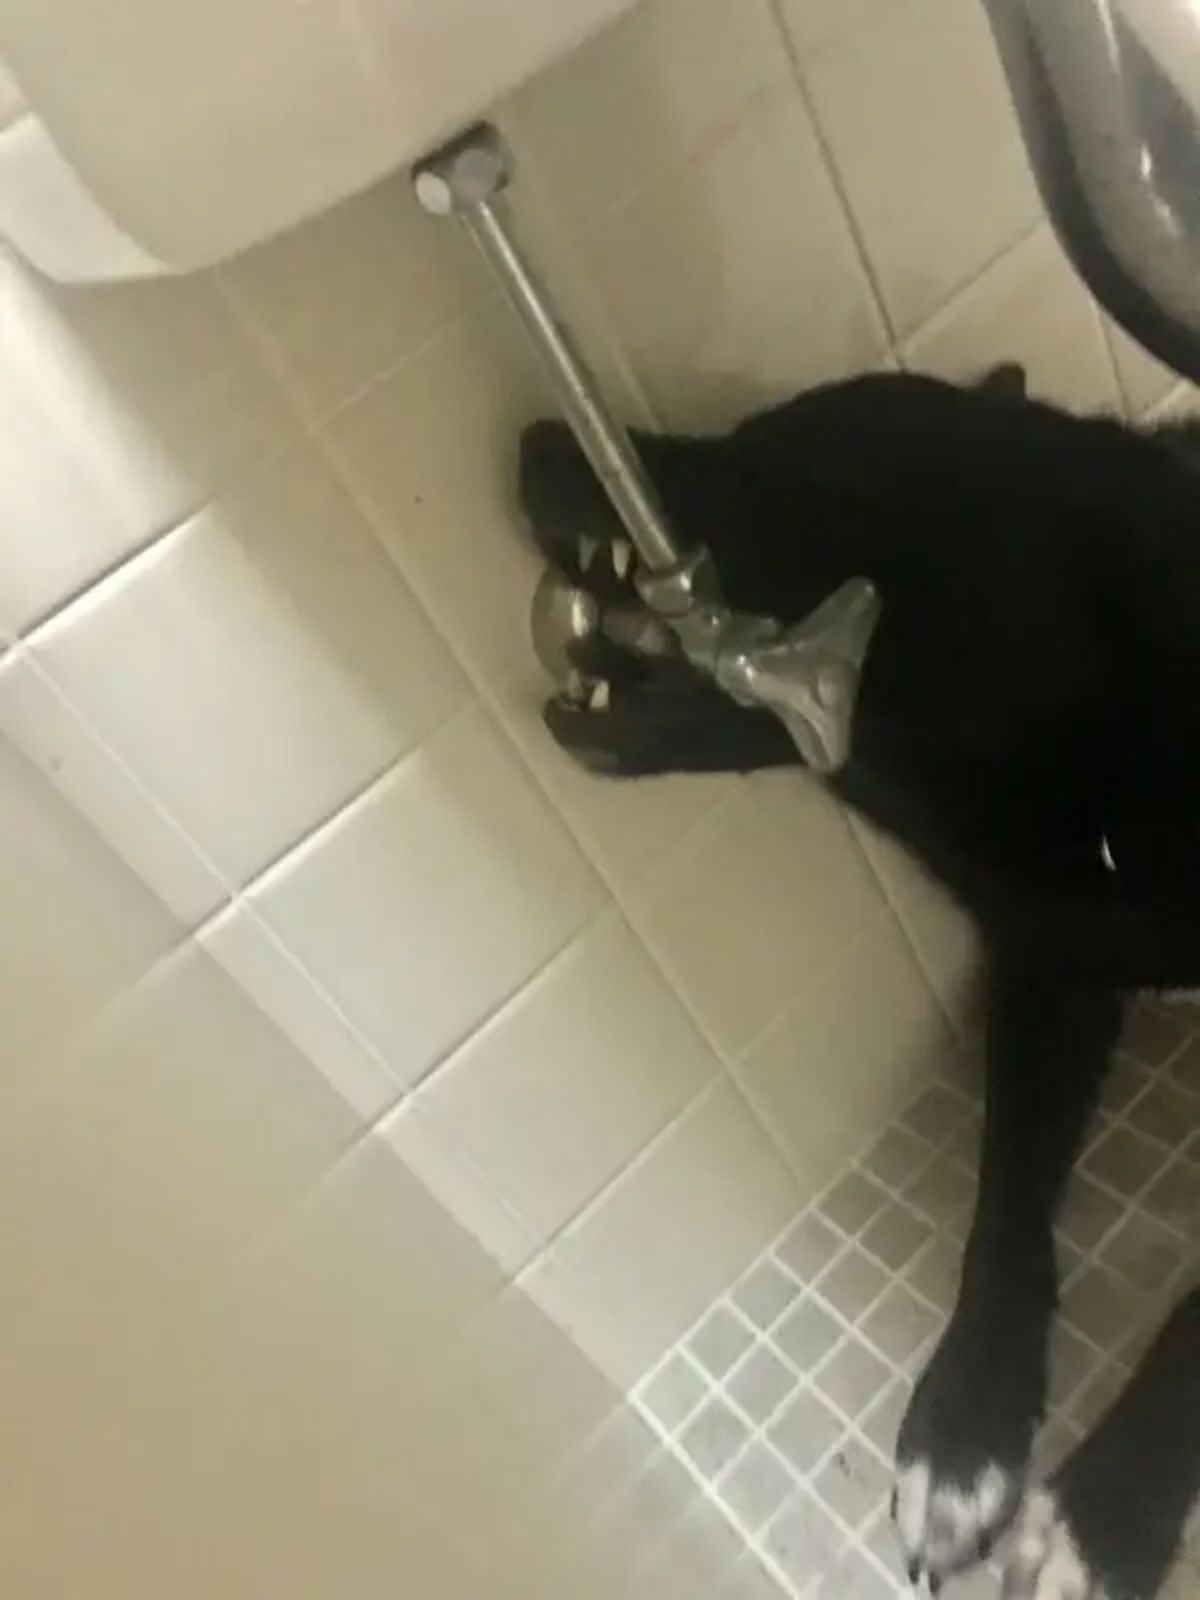 black dog with white toes laying on a bathroom floor biting the toilet water pipe